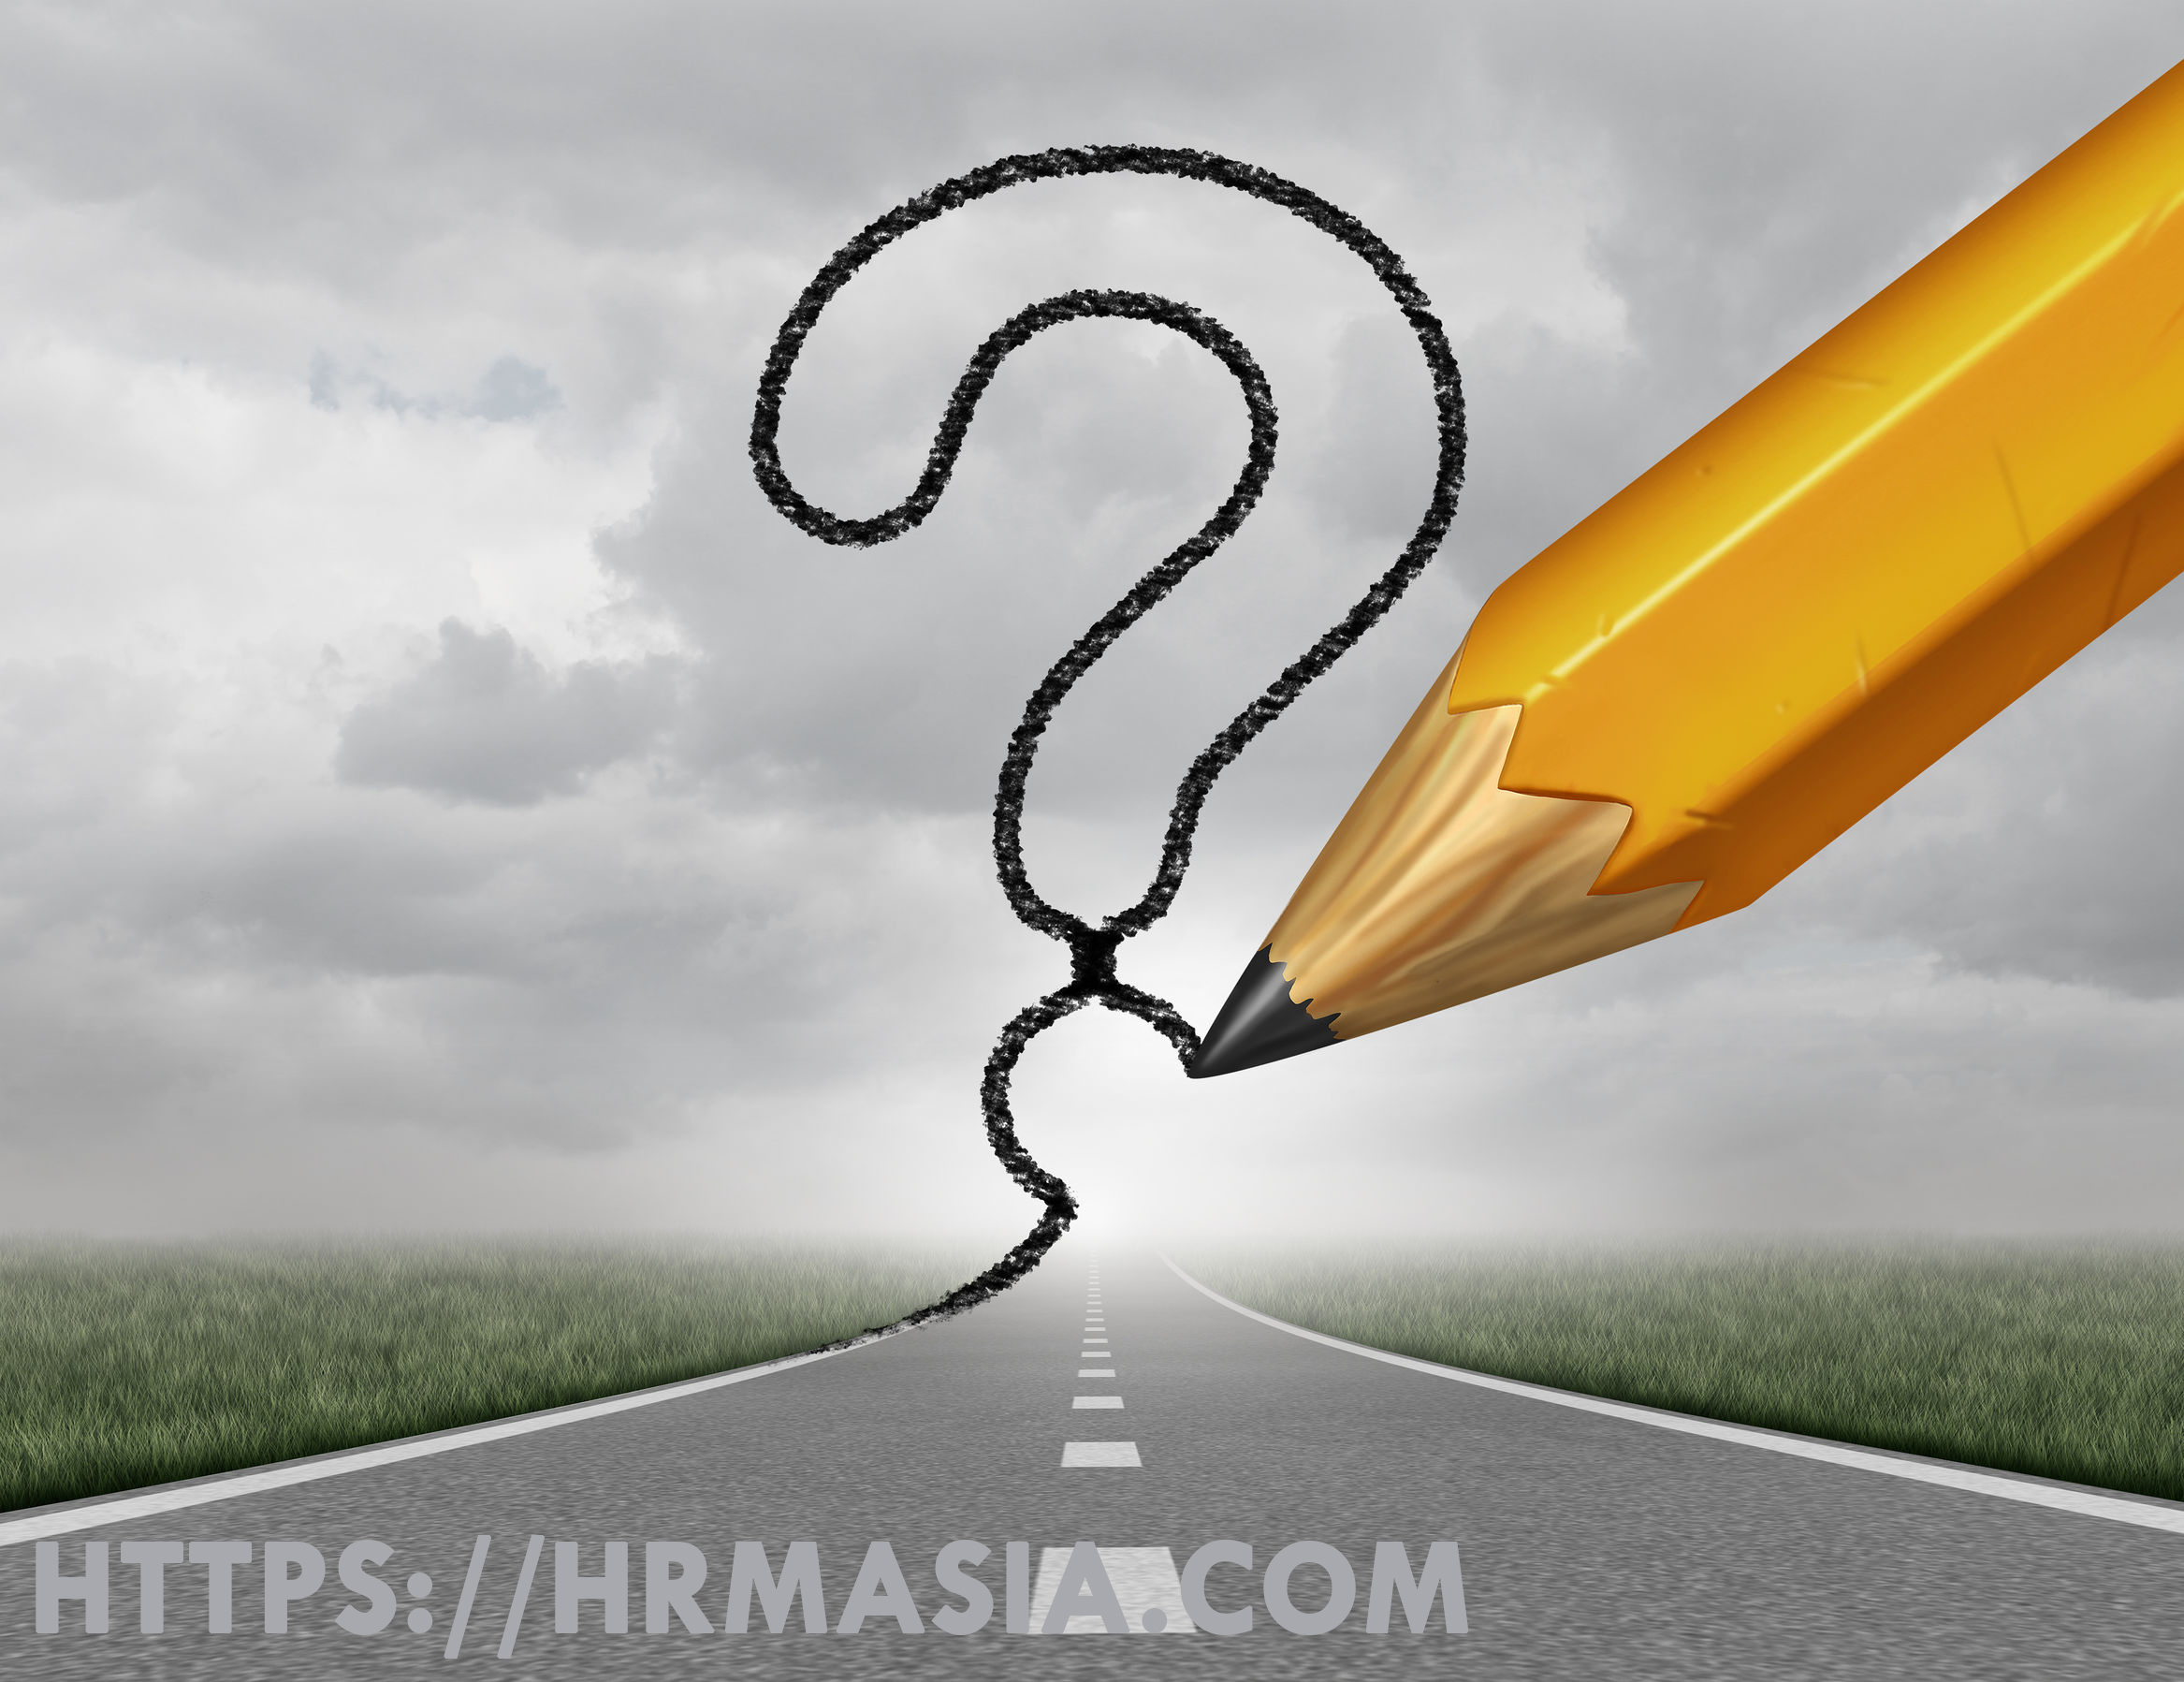 Business path questions road to change and corporate career pathway as a rising highway with a 3D illustration pencil drawing a question mark on a sky representing financial direction guidance and looking for answers.